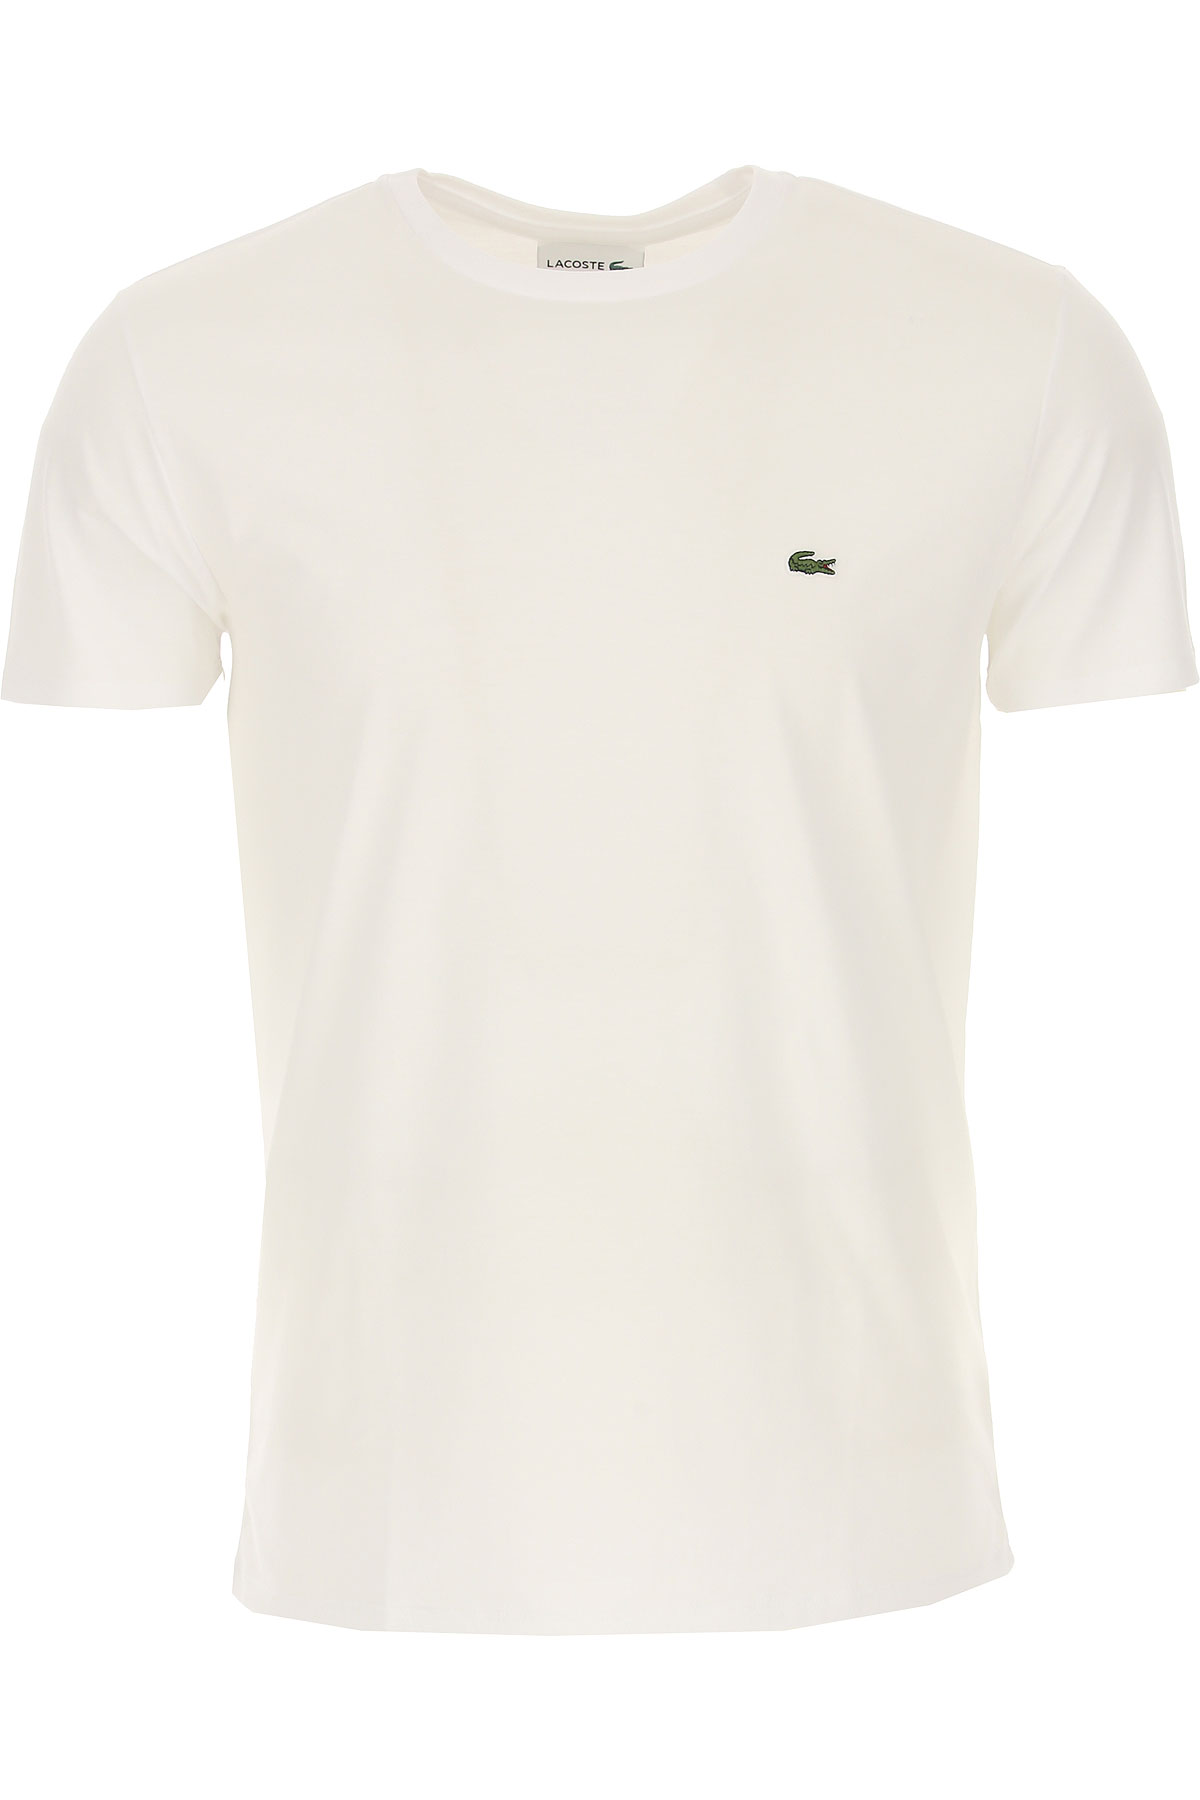 Mens Clothing Lacoste, Style code: th6709-001-